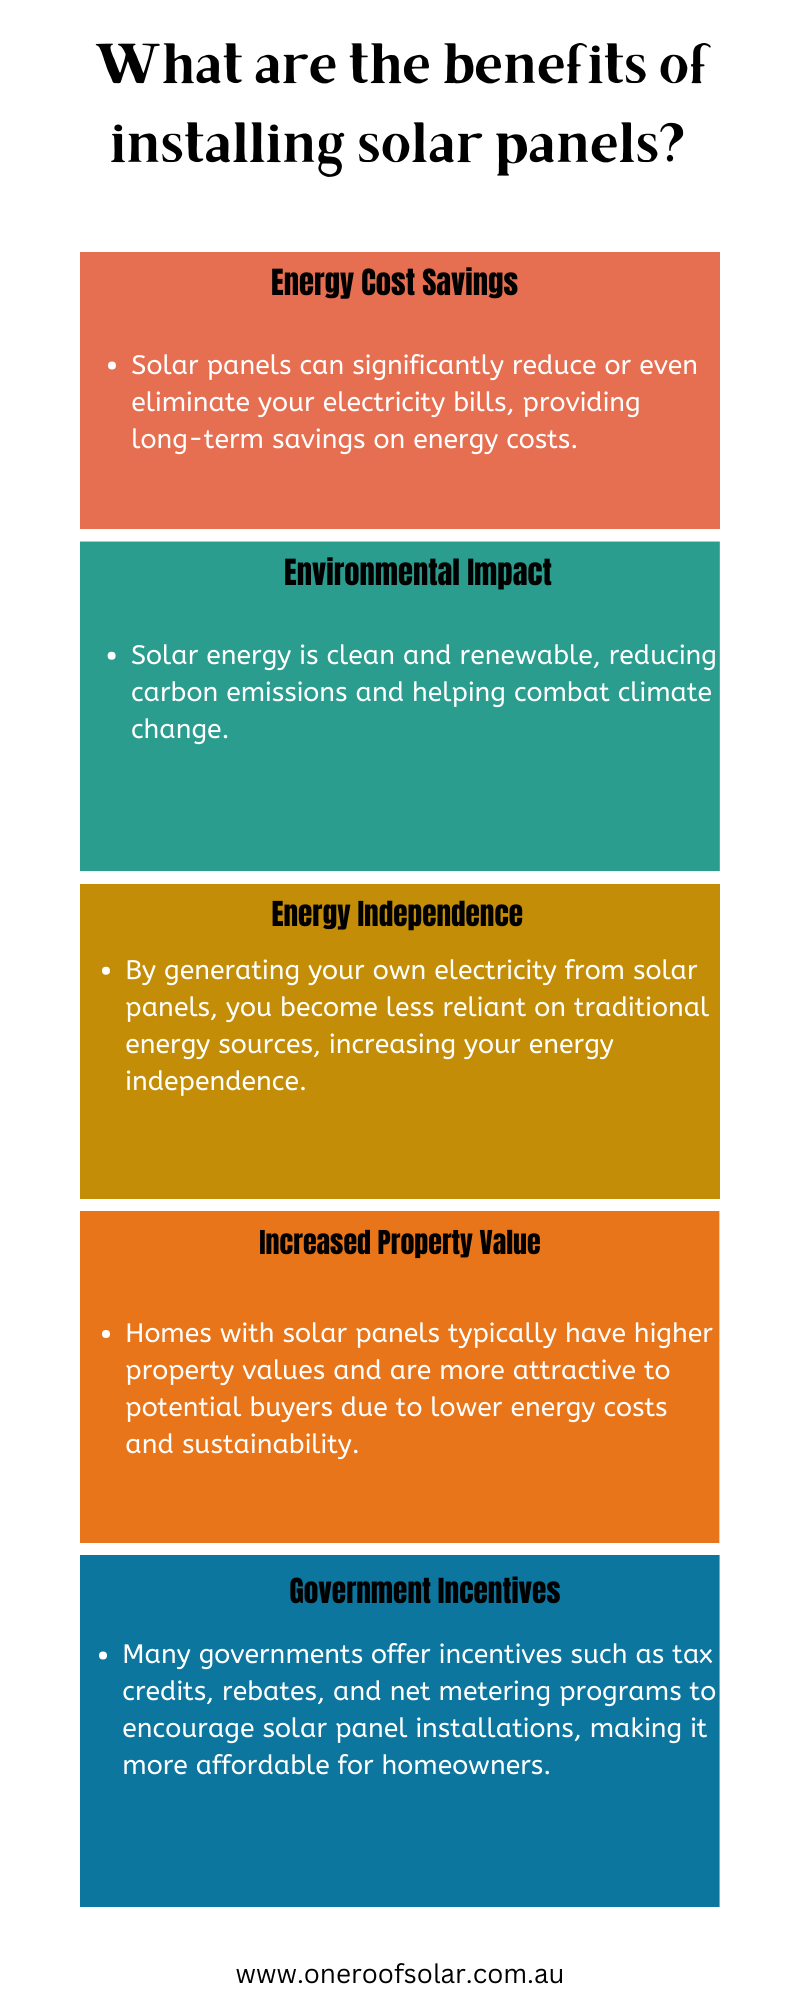 What are the benefits of installing solar panels? - Social Social Social | Social Social Social